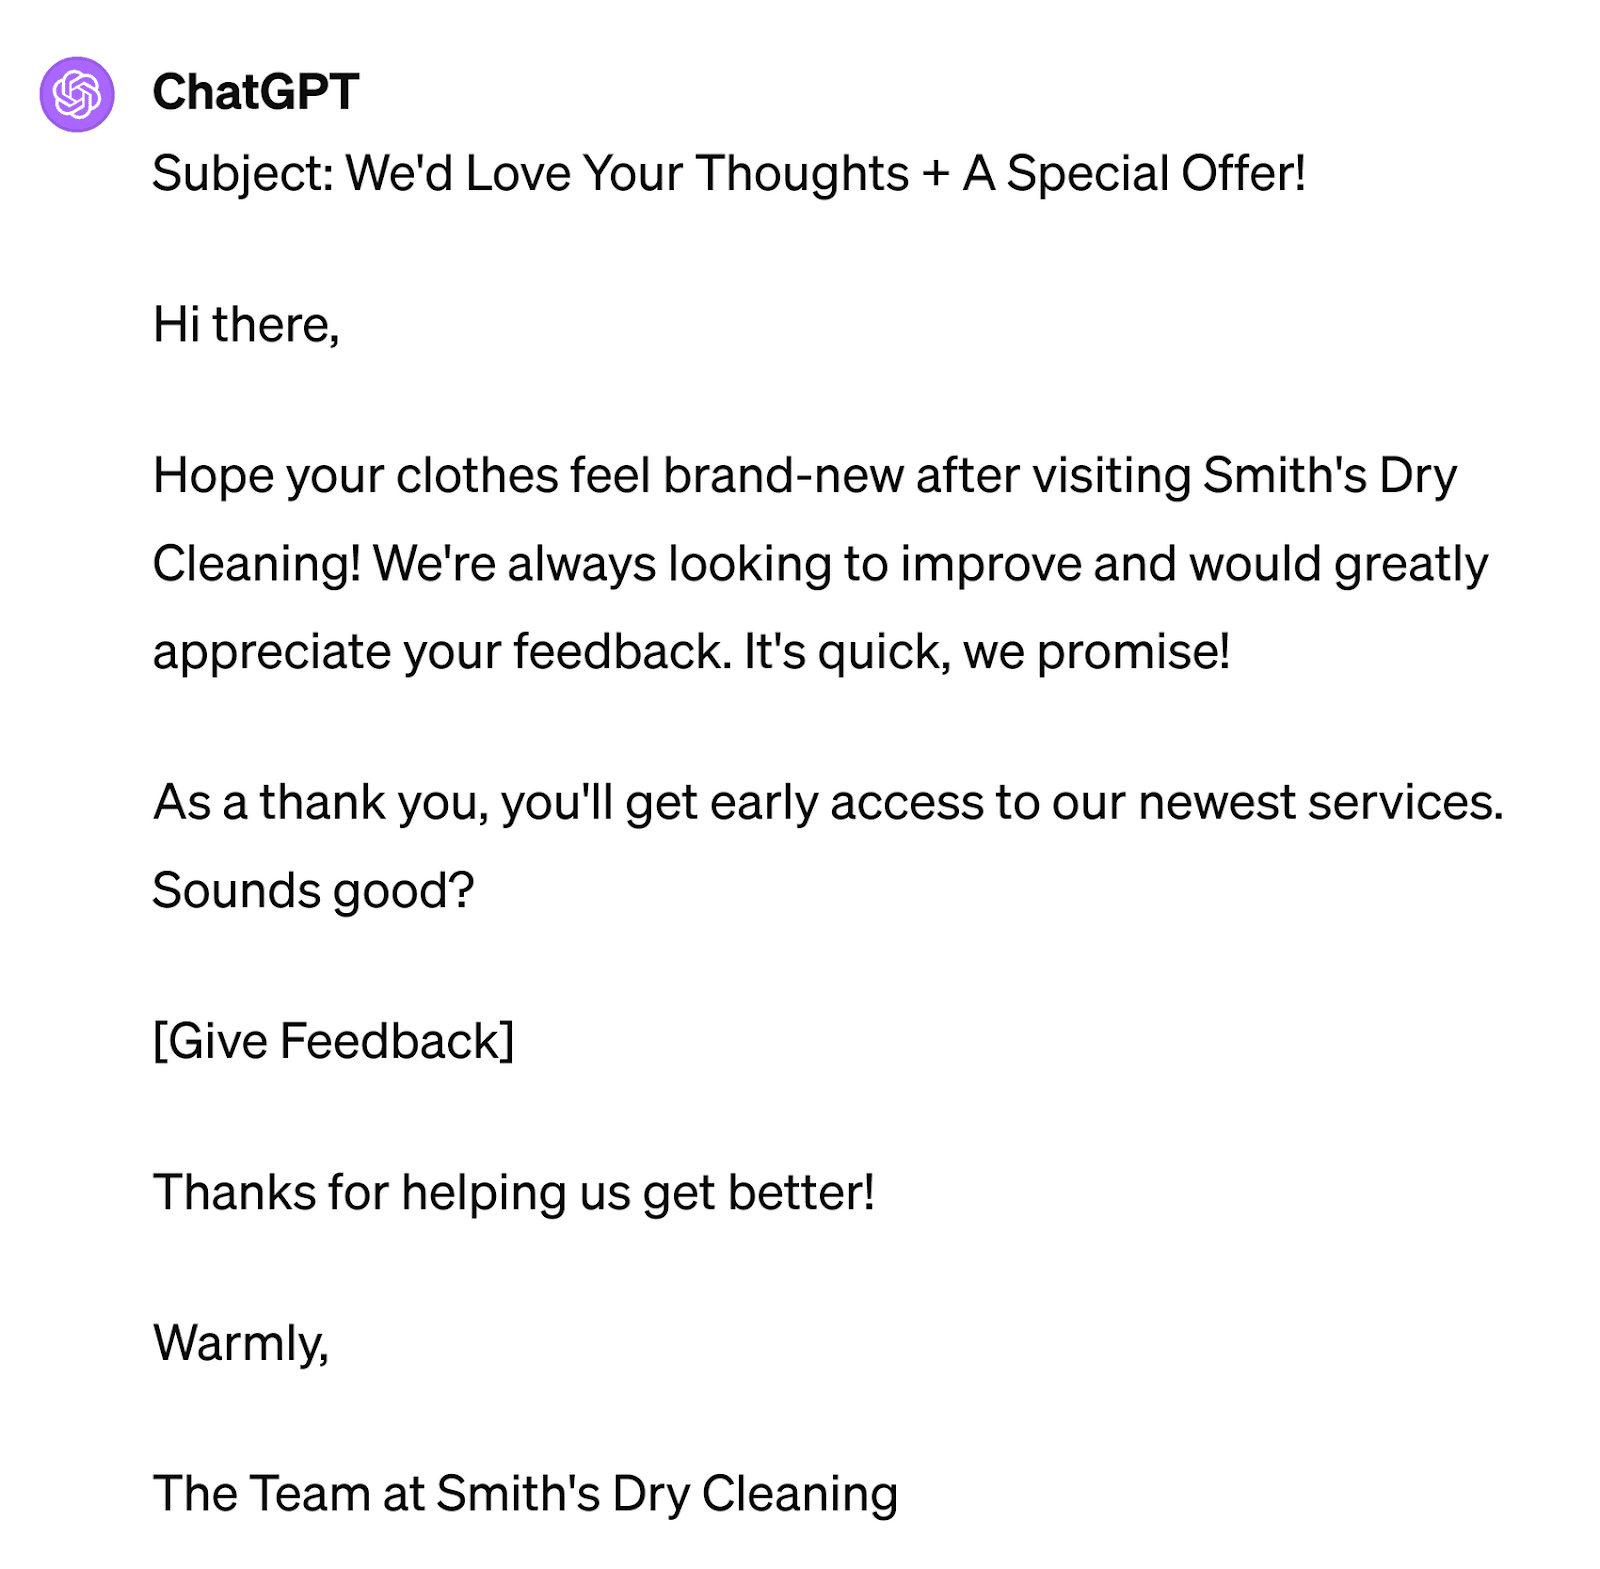 ChatGPT-generated email asking for feedback